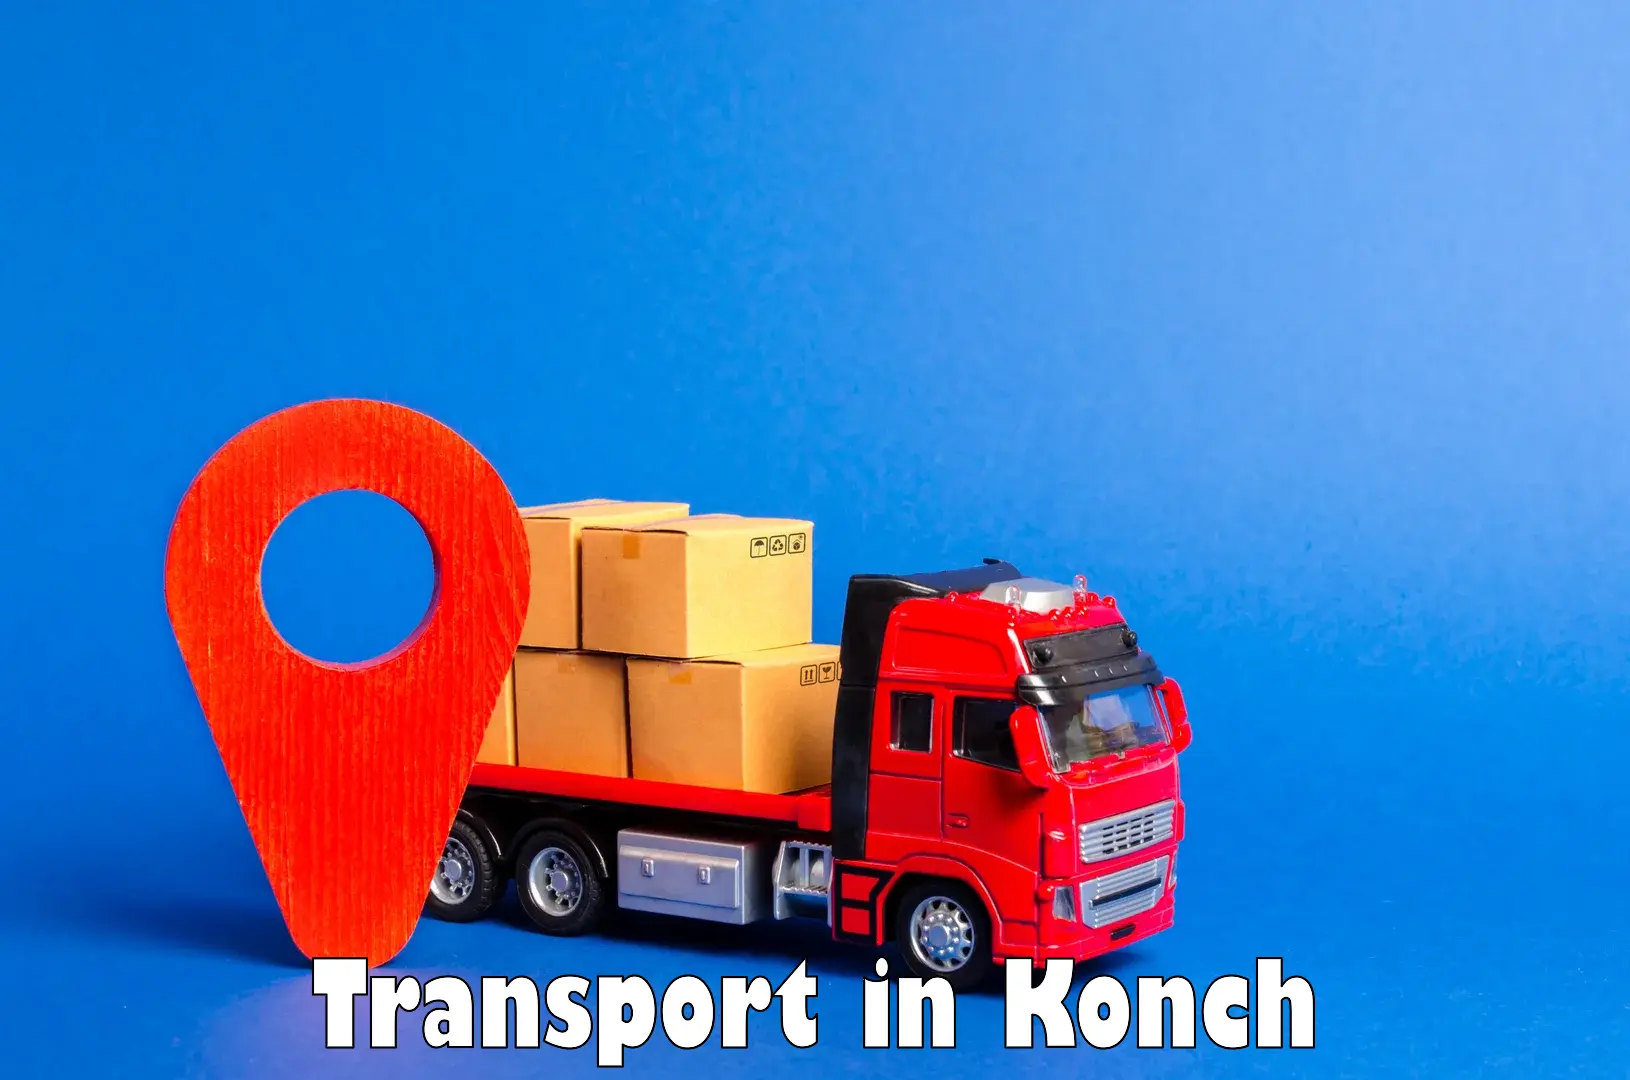 Package delivery services in Konch